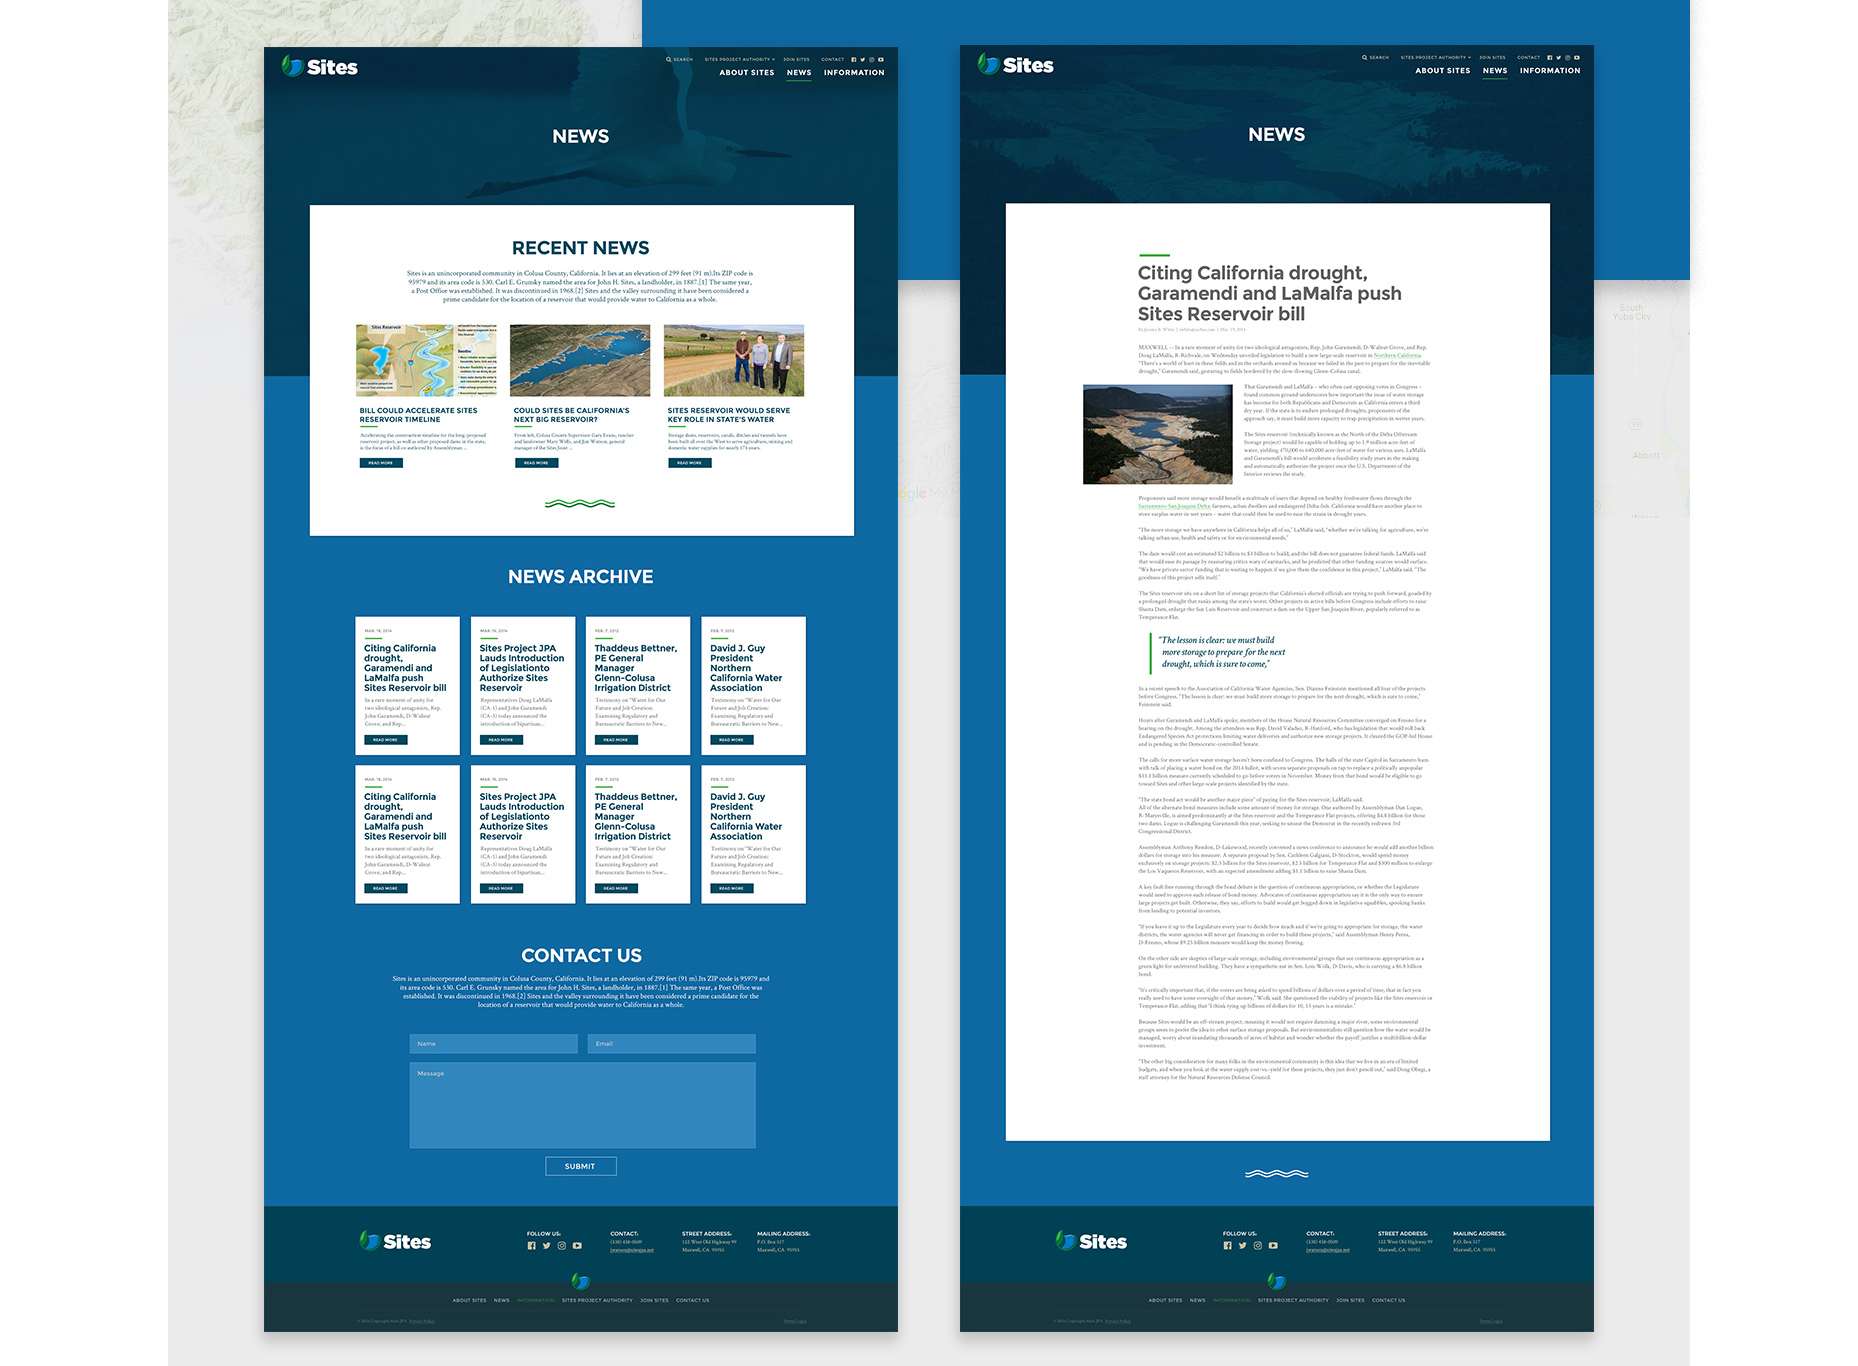 Joint Medias | Sites Reservoir Project news archive and single news web page design.